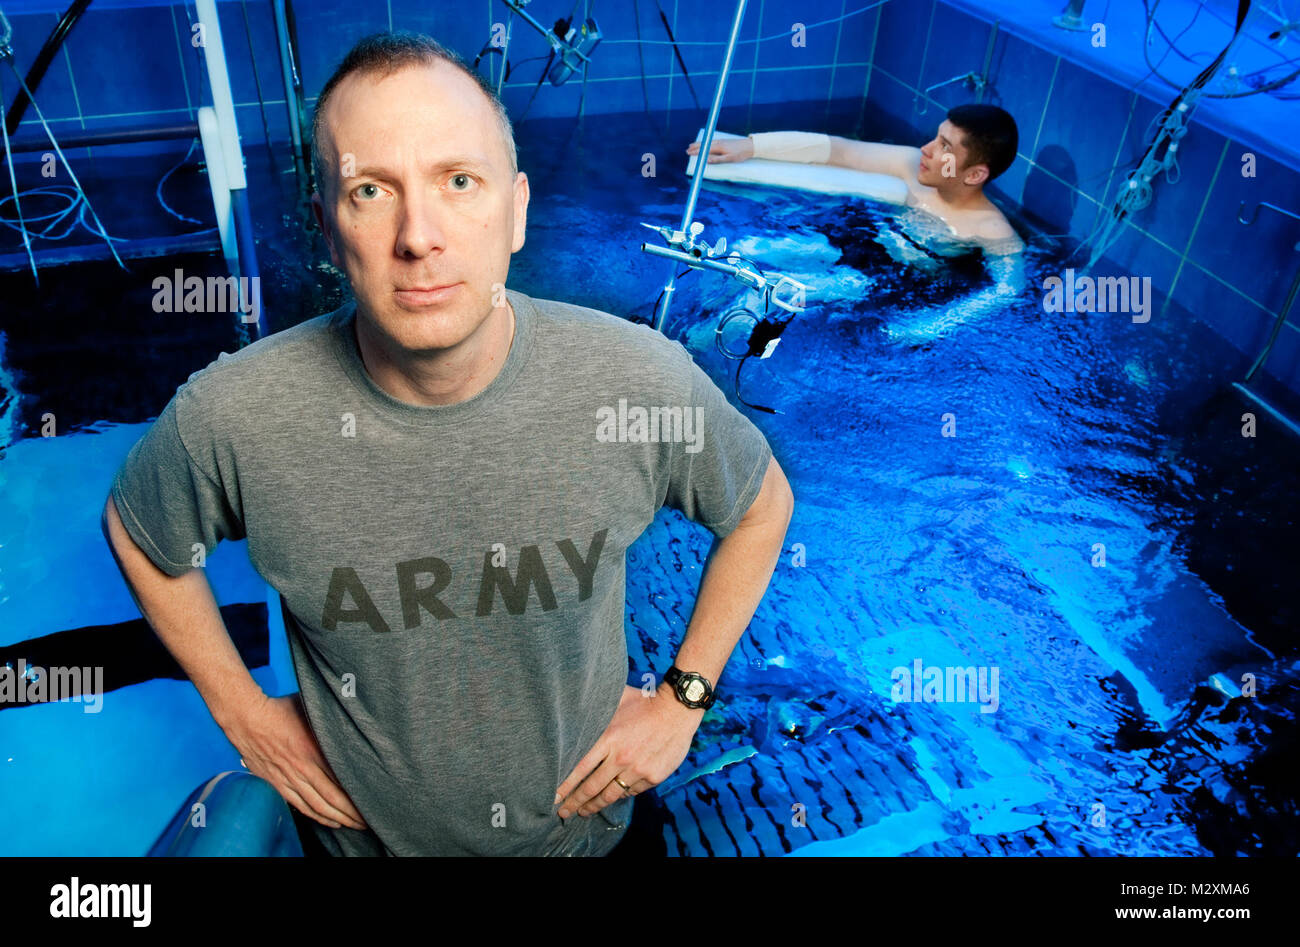 David Kamm/NSRDEC Photographer Capt. Dave DeGroot, Ph.D., puts volunteers into a water immersion tank at the U.S. Army Institute of Envrionmental Medicine at Natick Soldier Systems Center as part of a study that is looking at how Soldiers' bodies cool down. heal2 by MilitaryHealth Stock Photo